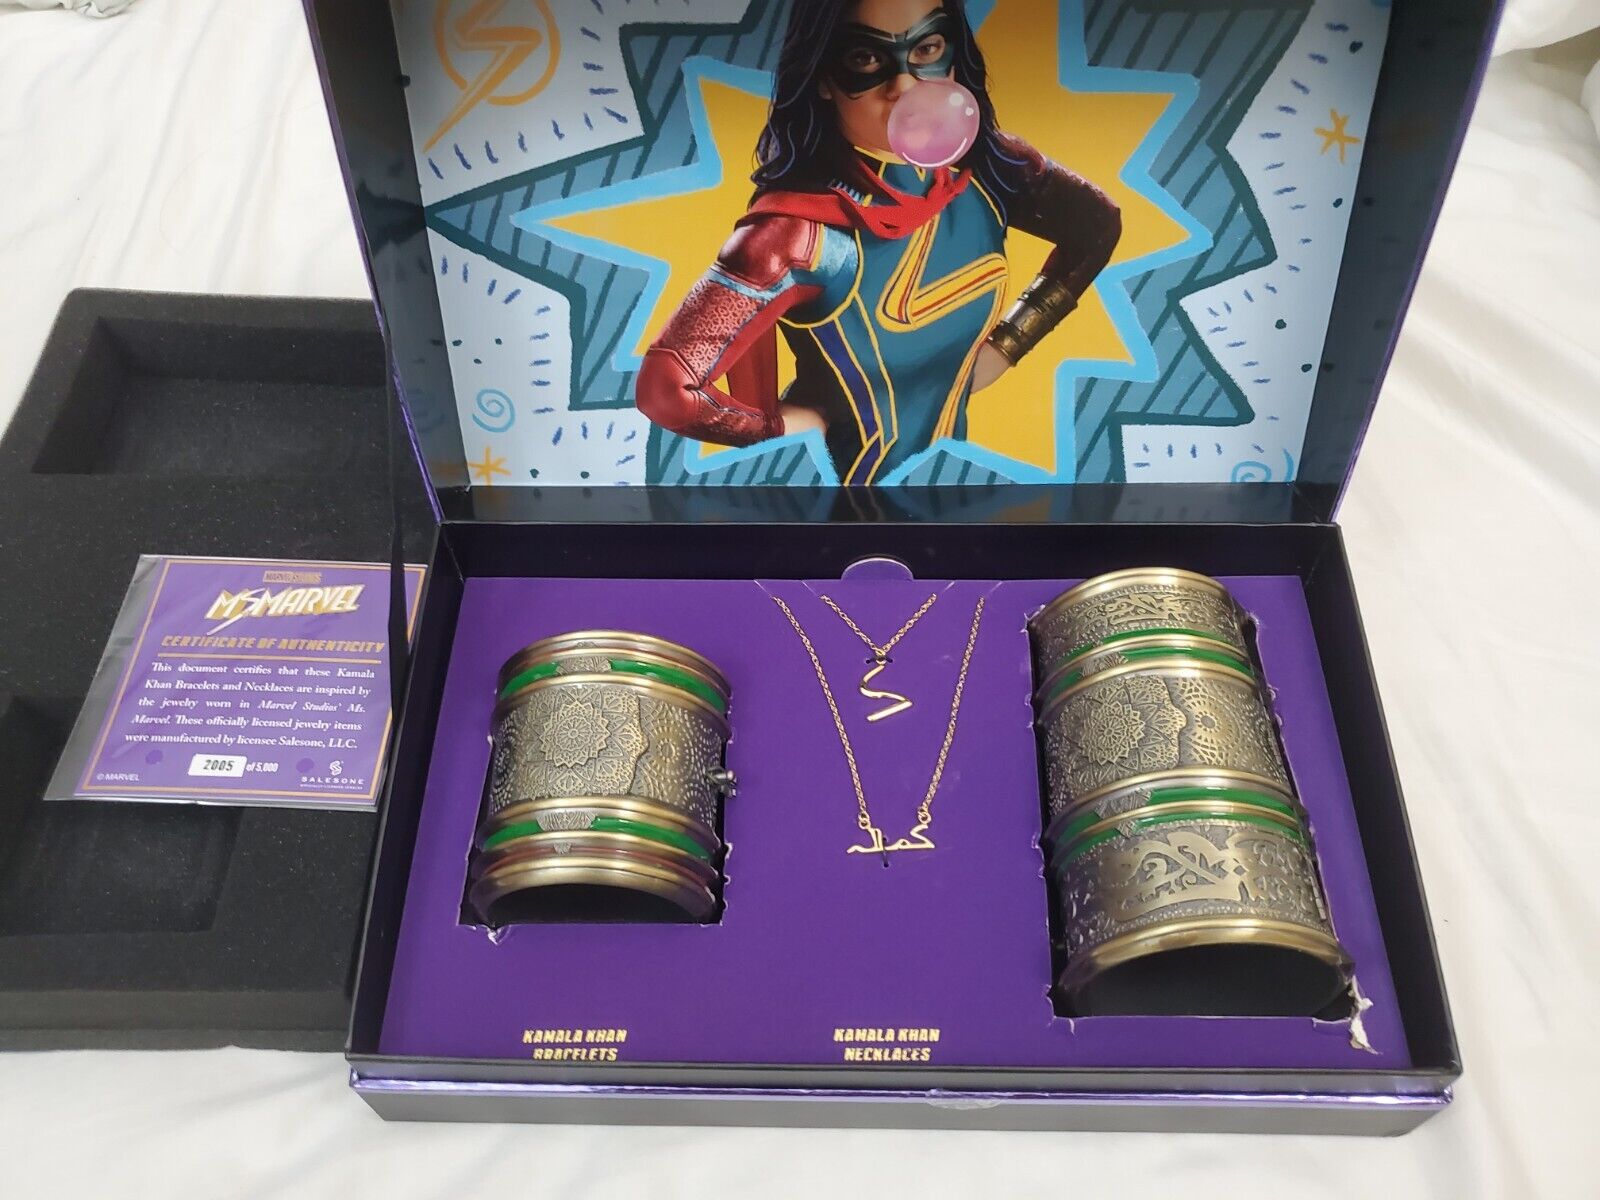 NEW  Disney Ms Marvel Collector's Box Set - Limited Edition Gamestop Exclusive.